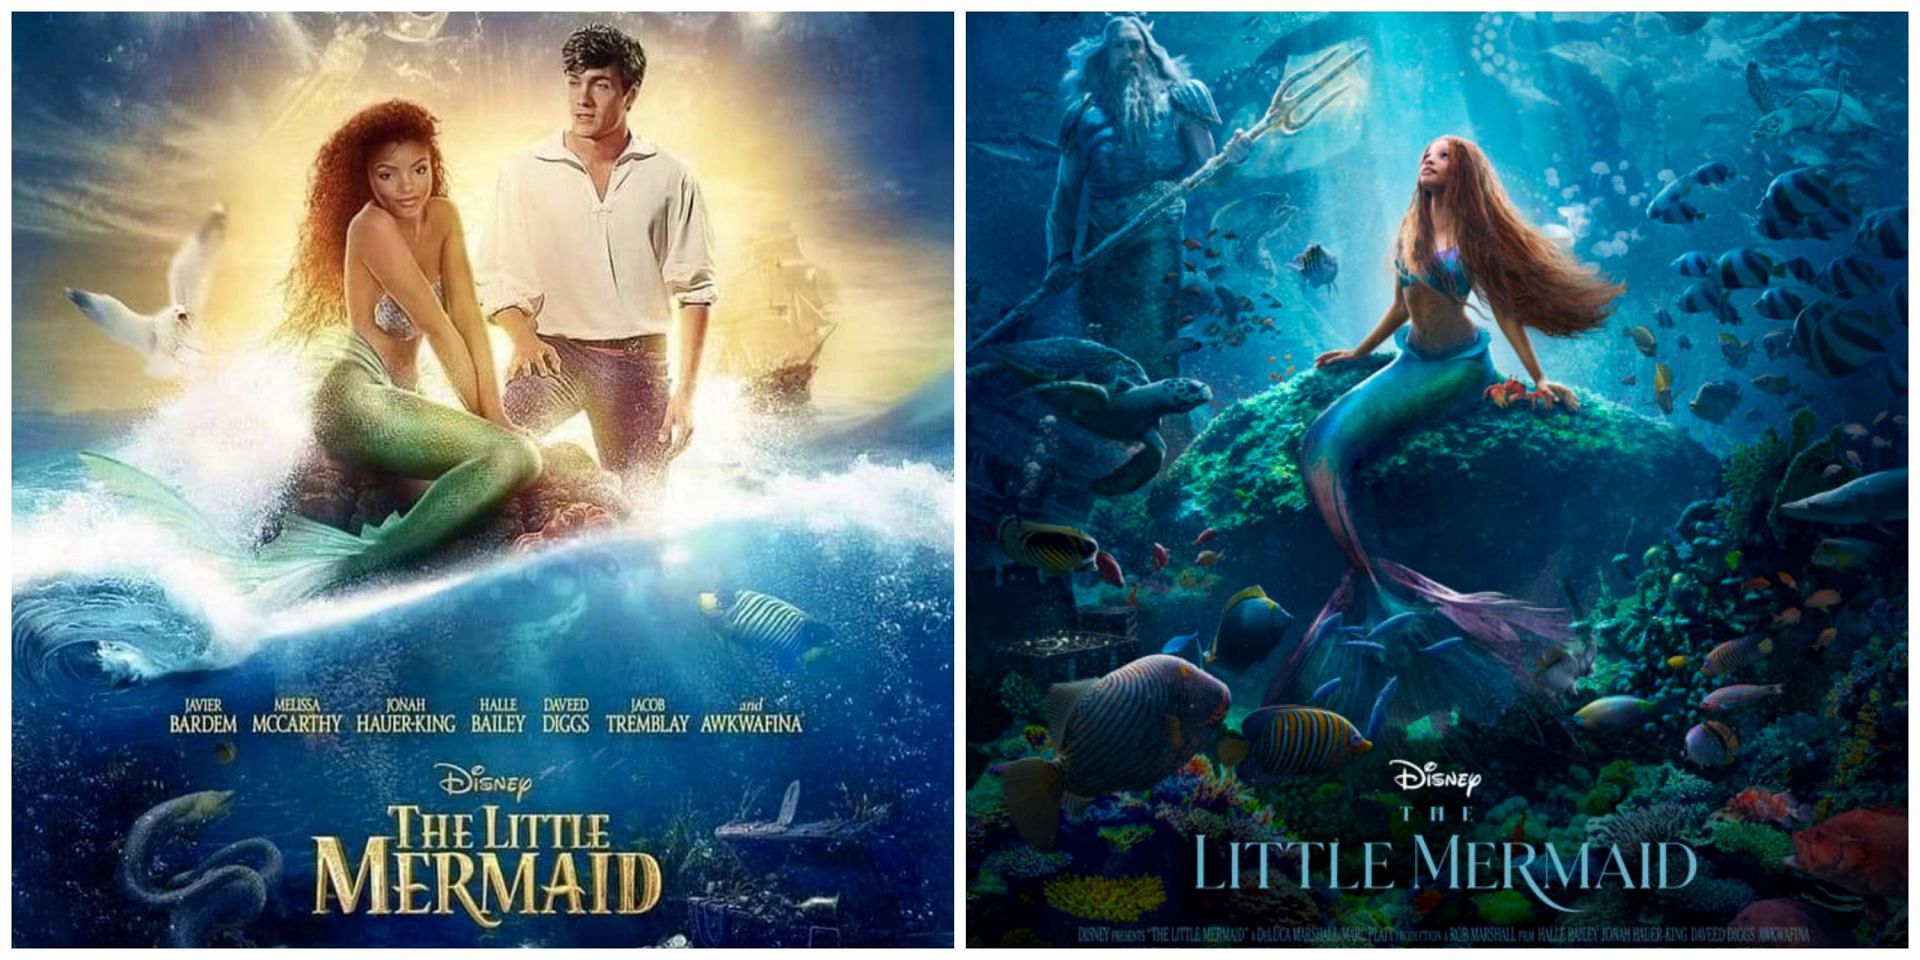 Social media users reacted to The Little Mermaid premiered at the Oscars: Reactions explored. (Image via The Little Mermaid)